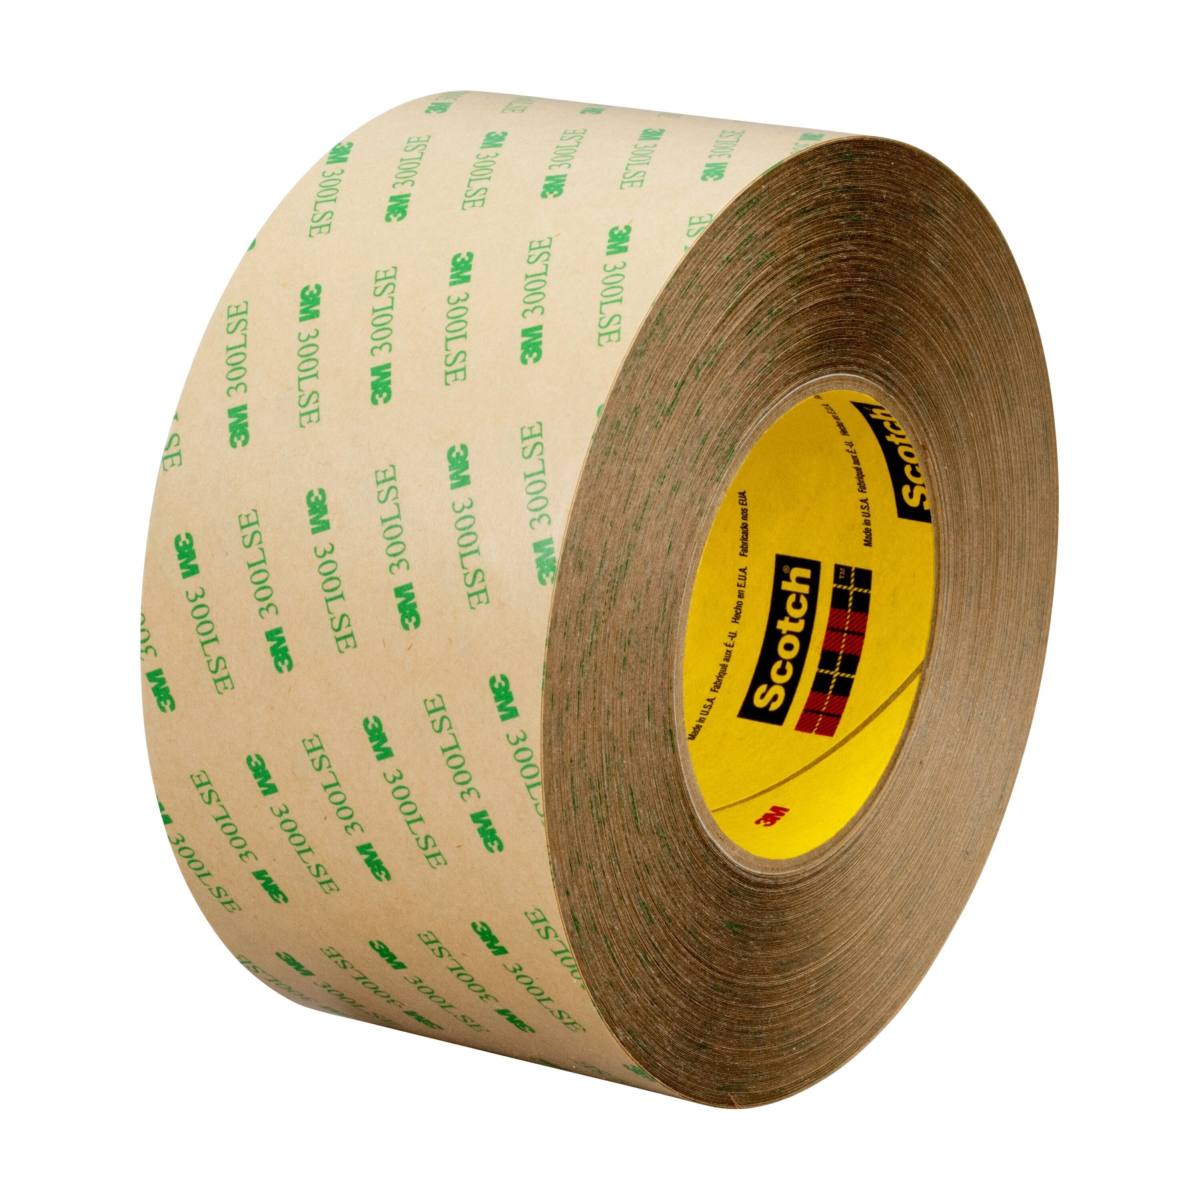 3M Dubbelzijdig plakband met polyester drager 93020LE, transparant, 1372 mm x 55 m, 0,20 mm